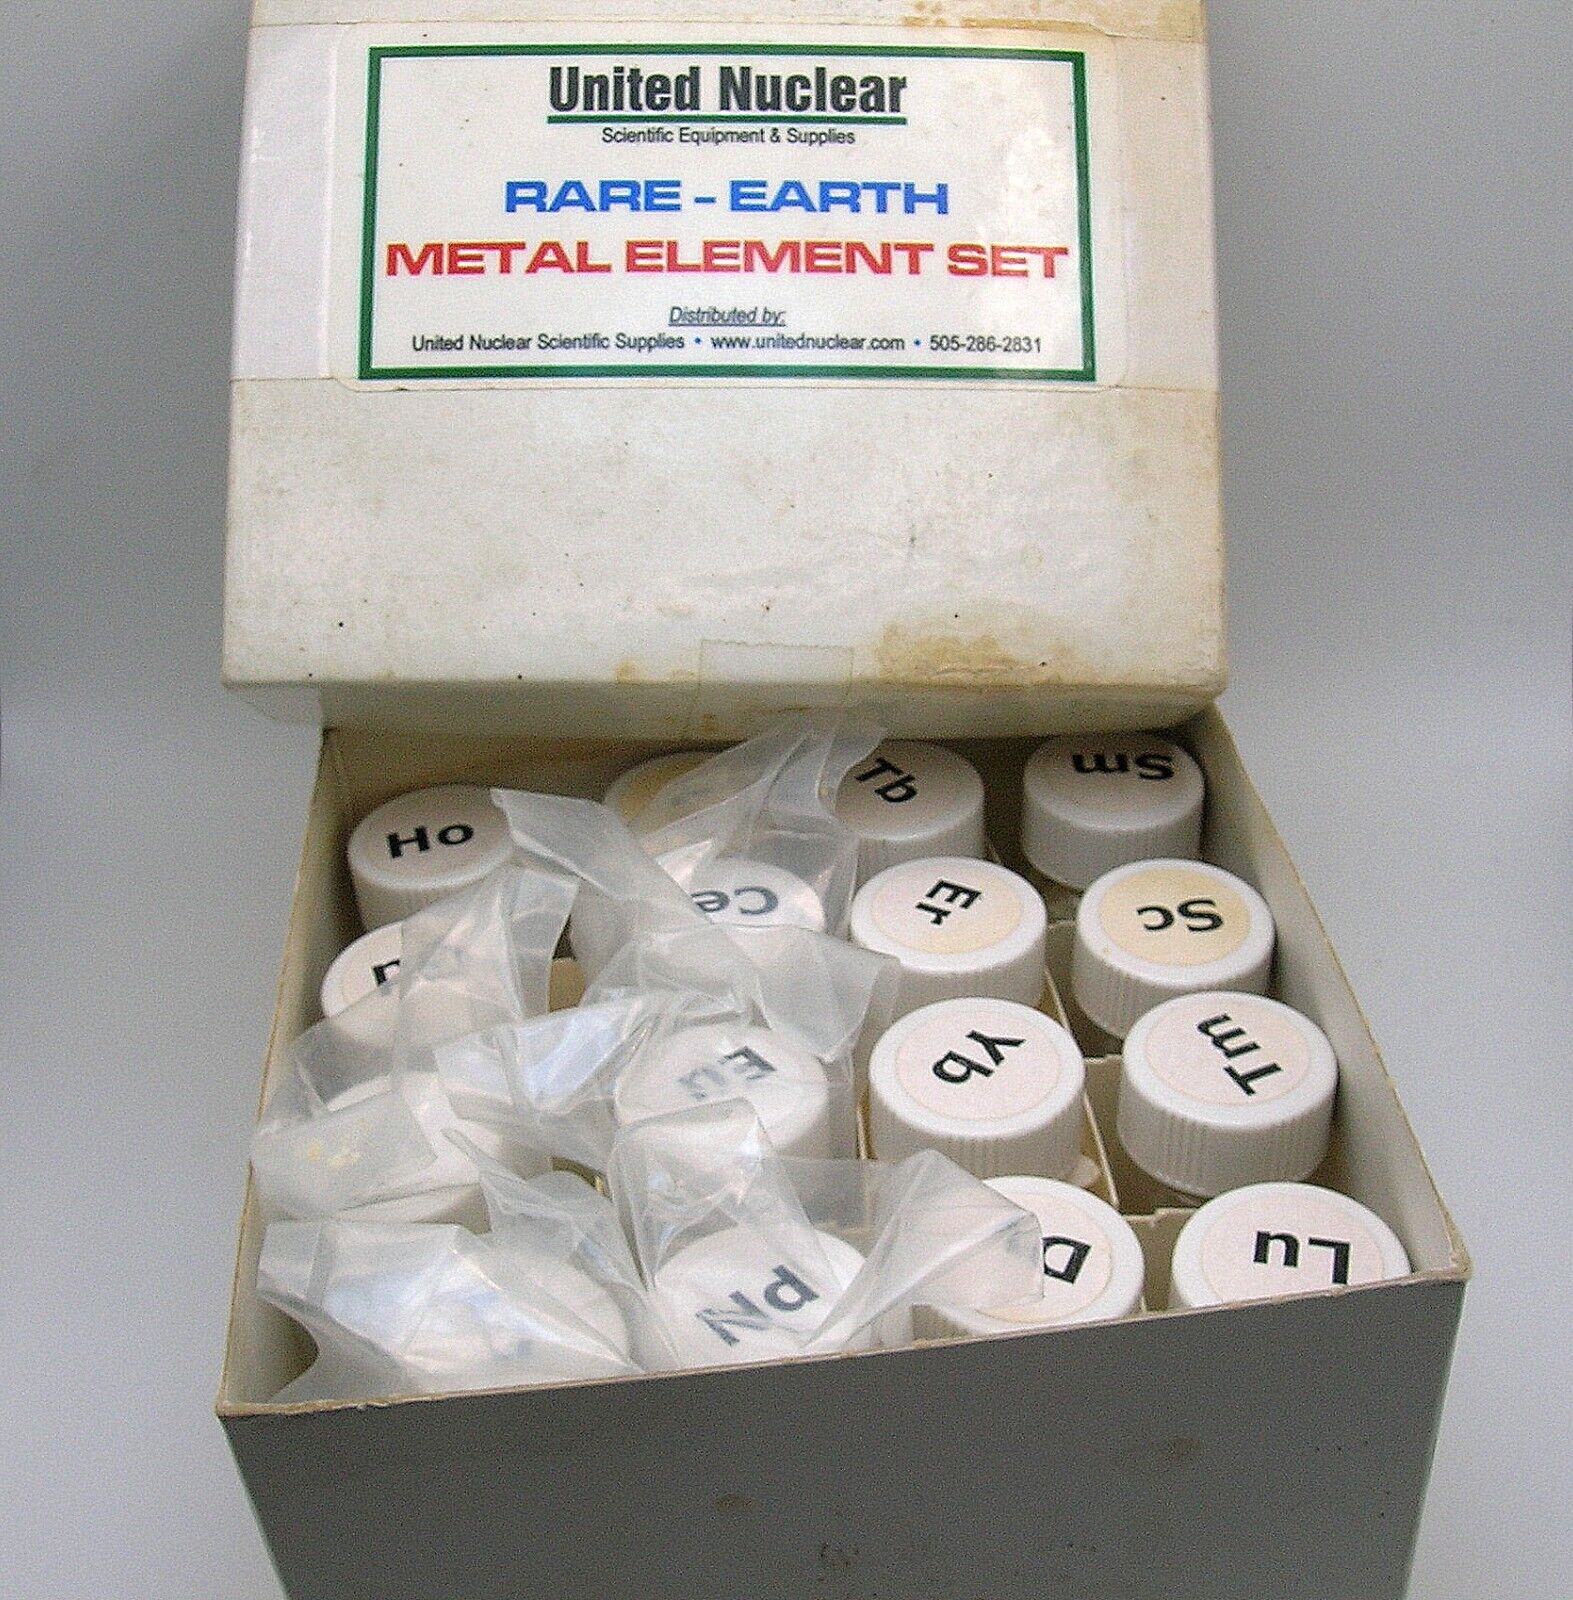 RARE-EARTH METAL ELEMENT SET OF 16 ELEMENTS BY UNITED NUCLEAR SCIETIFIC SUPPLIES